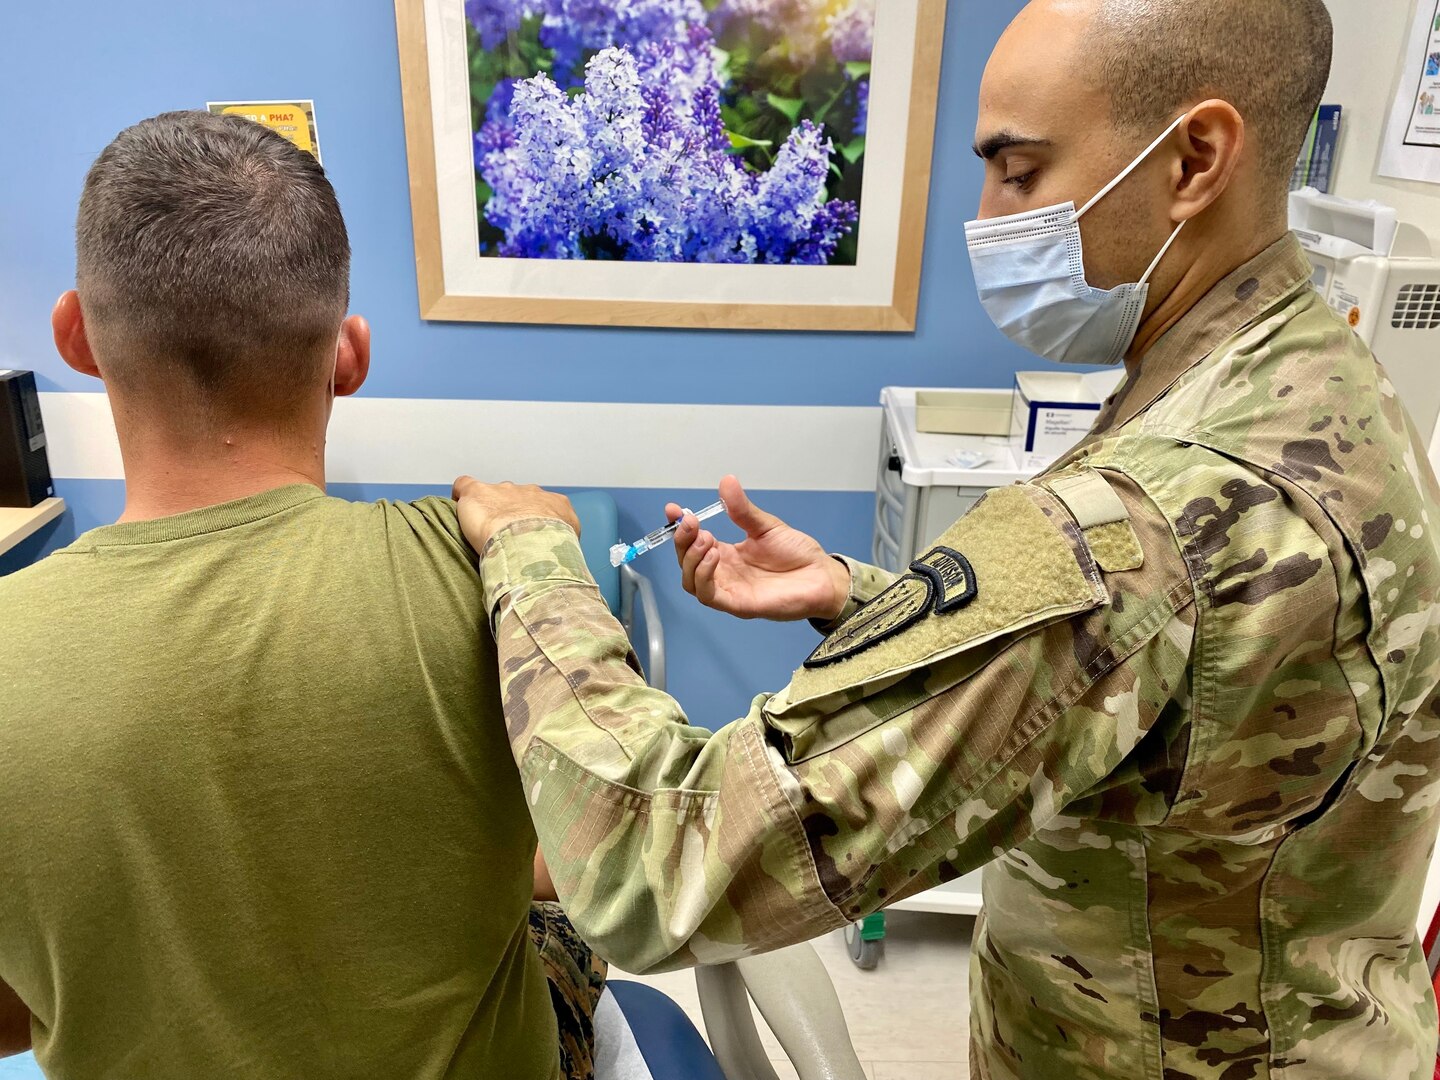 Sgt. Jonathan Harris, 3rd Battalion, 353rd Infantry Regiment, vaccinates Lance Cpl. Mason Brennan, 1st Battalion, 23rd Marine Regiment at the Soldier Center Medical Home clinic during his annual periodic health assessment at the Joint Readiness Training Center and Fort Polk, La. on July 22.